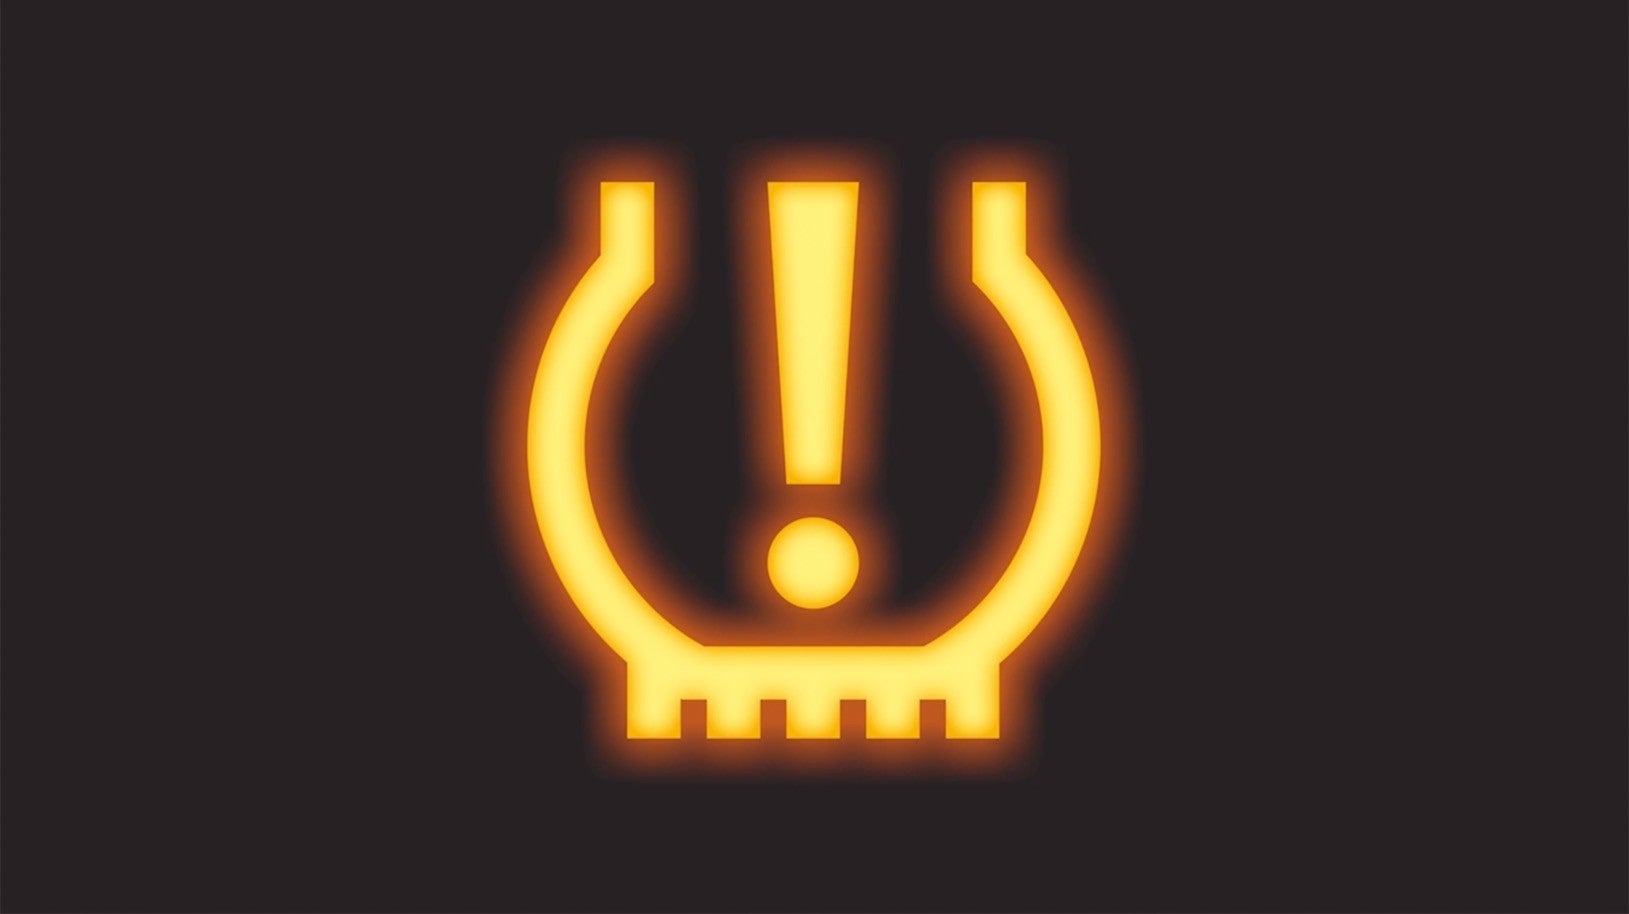  Image of the Tire Pressure Monitoring System Light | John Kennedy Subaru in Plymouth Meeting PA